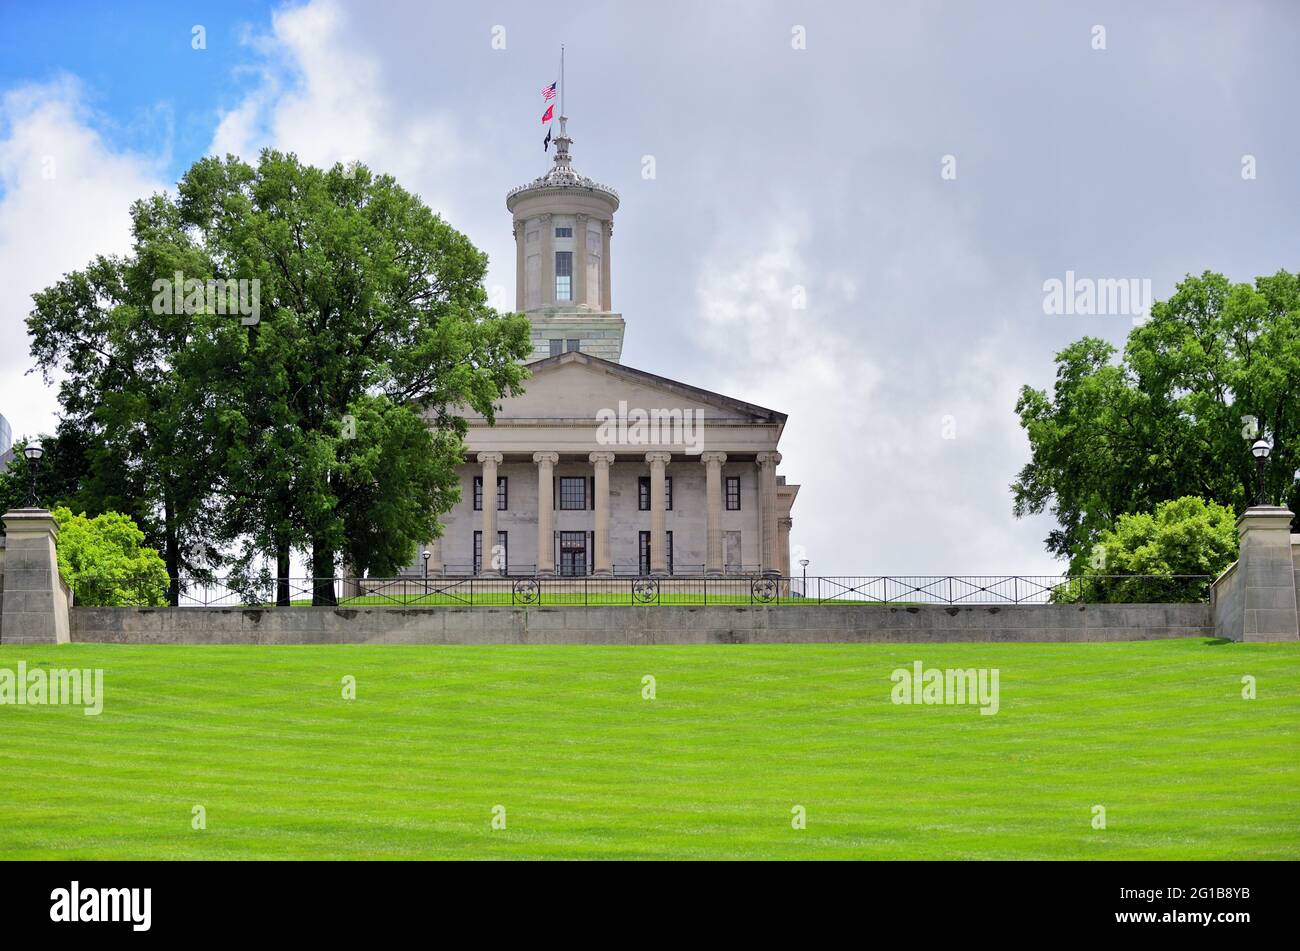 Nashville, Tennessee, USA. The Tennessee State Capitol Building was built between 1845 and 1859 and in Greek Revival style of architecture. Stock Photo